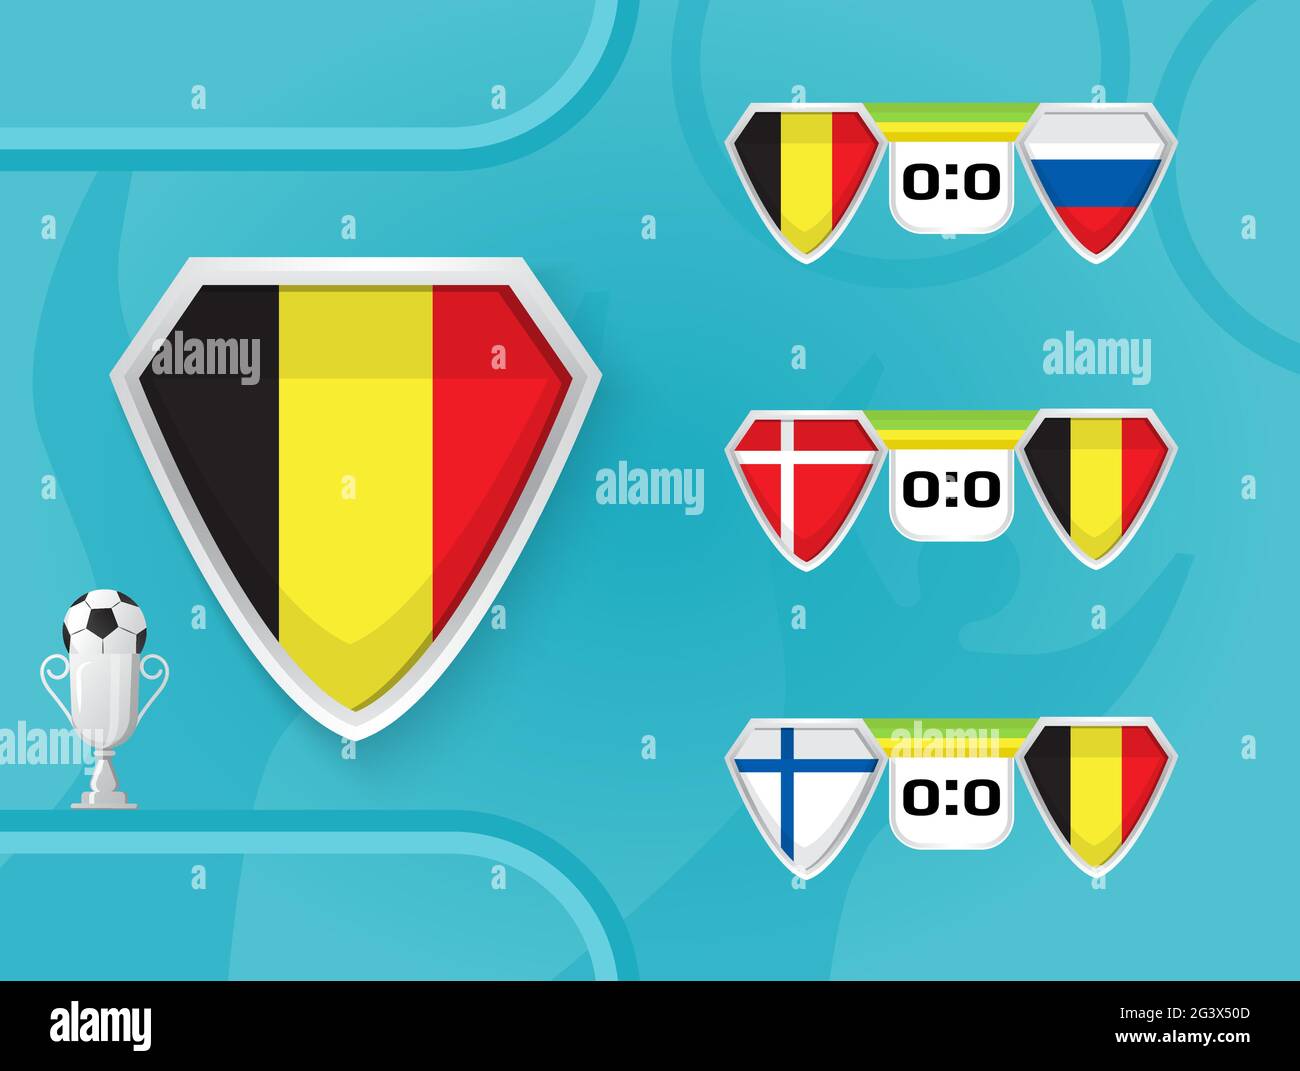 Schedule of national football team of Belgium matches in the European Championship 2020. Shields with the flag of Denmark, Finland, Belgium, Russia. Stock Vector